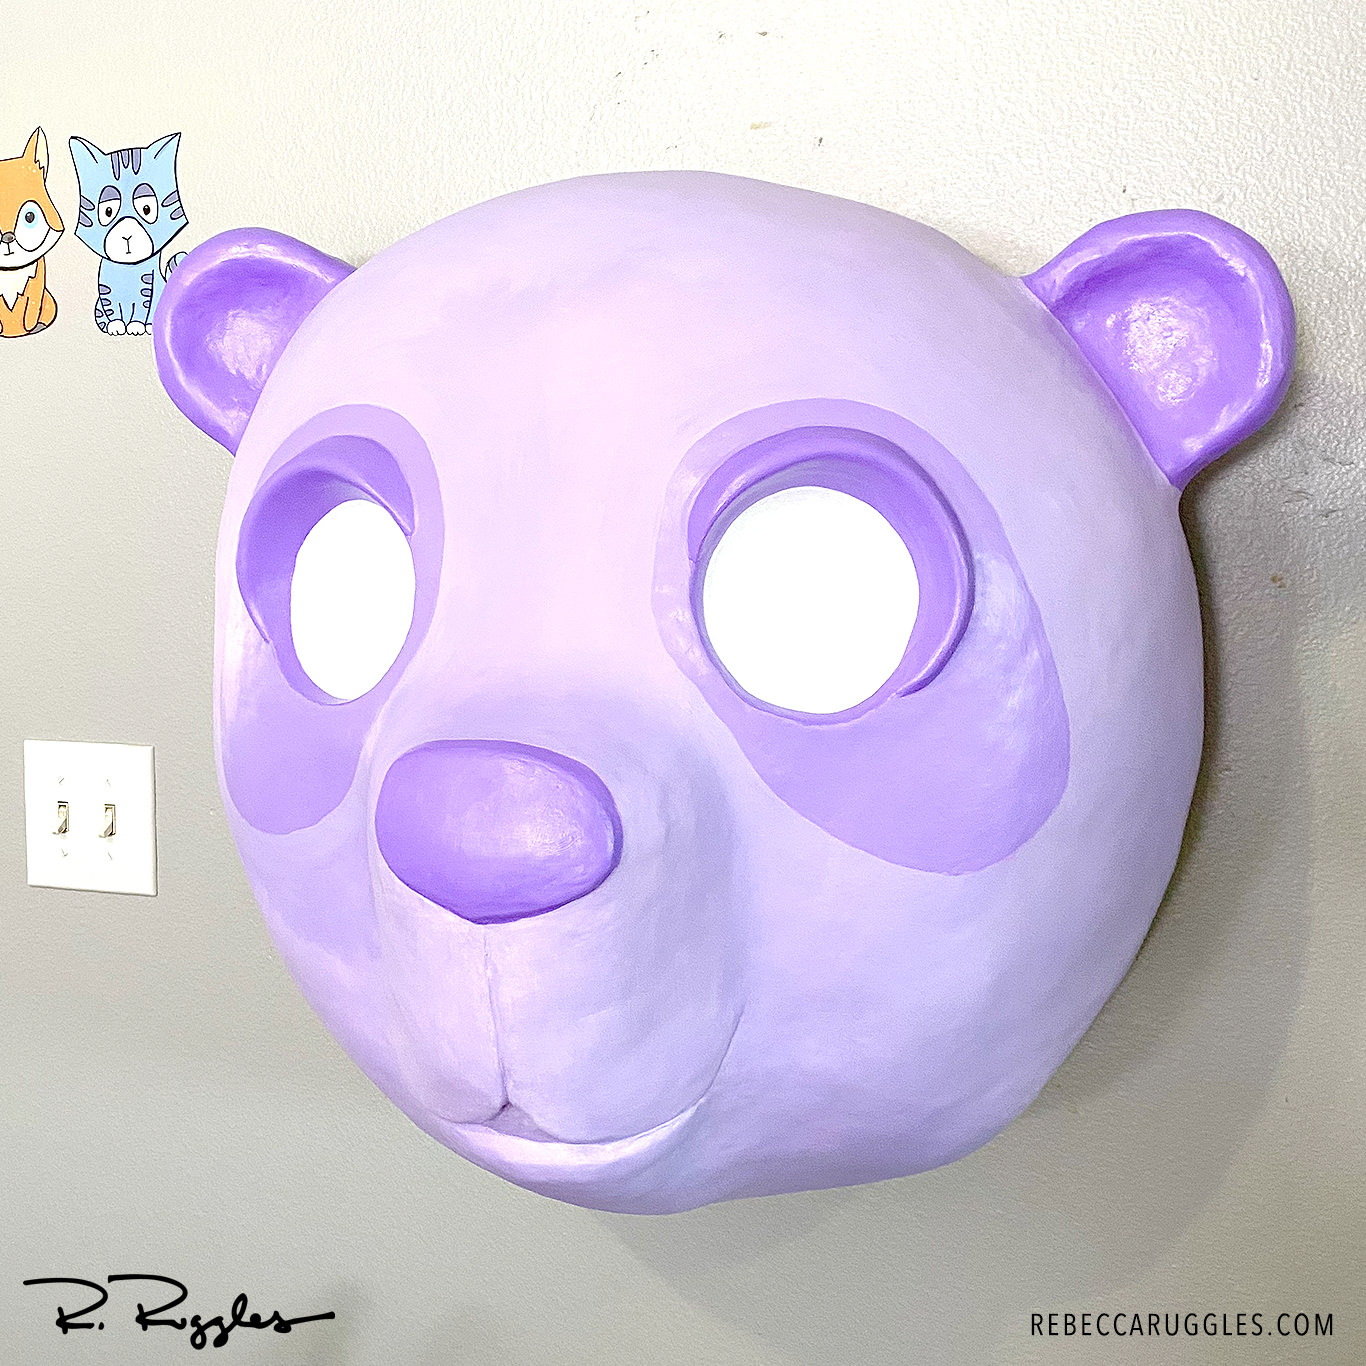 Giant panda sculpture being painted with shades of purple acrylic paint.